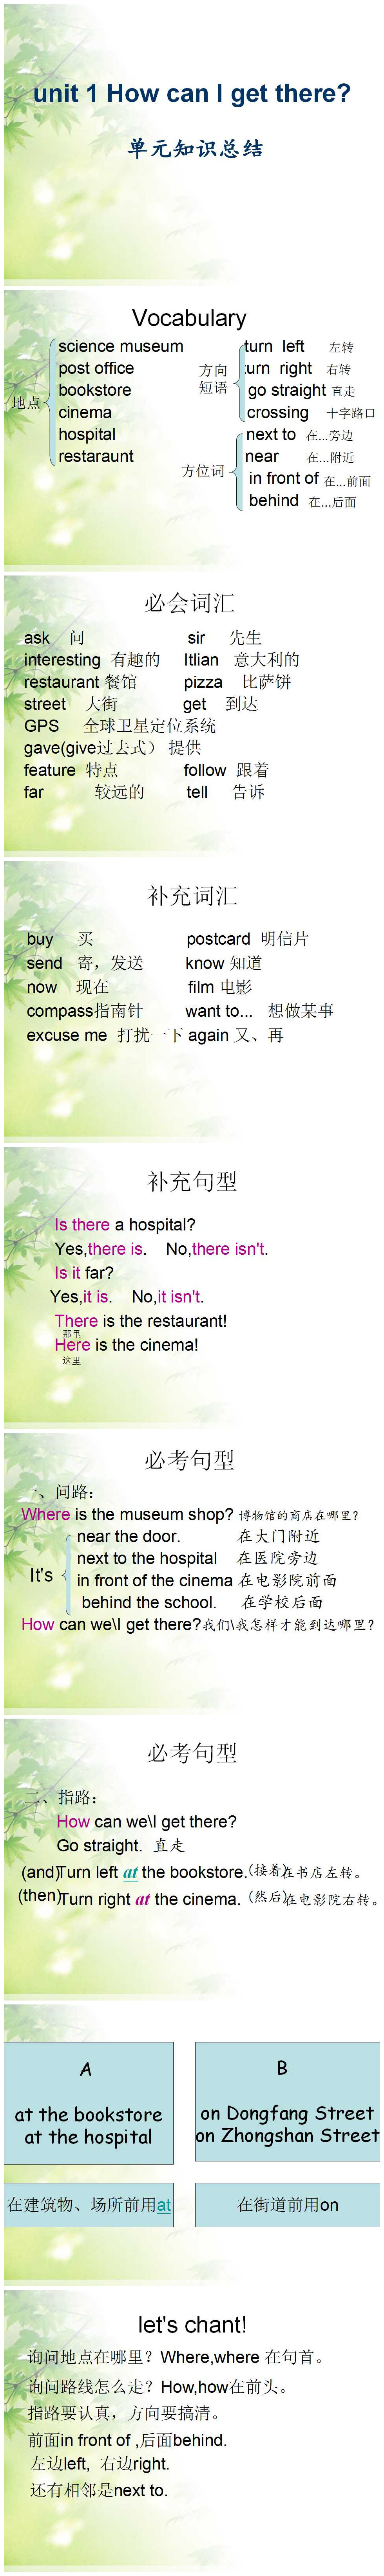 《How can I get there?》PPT课件12